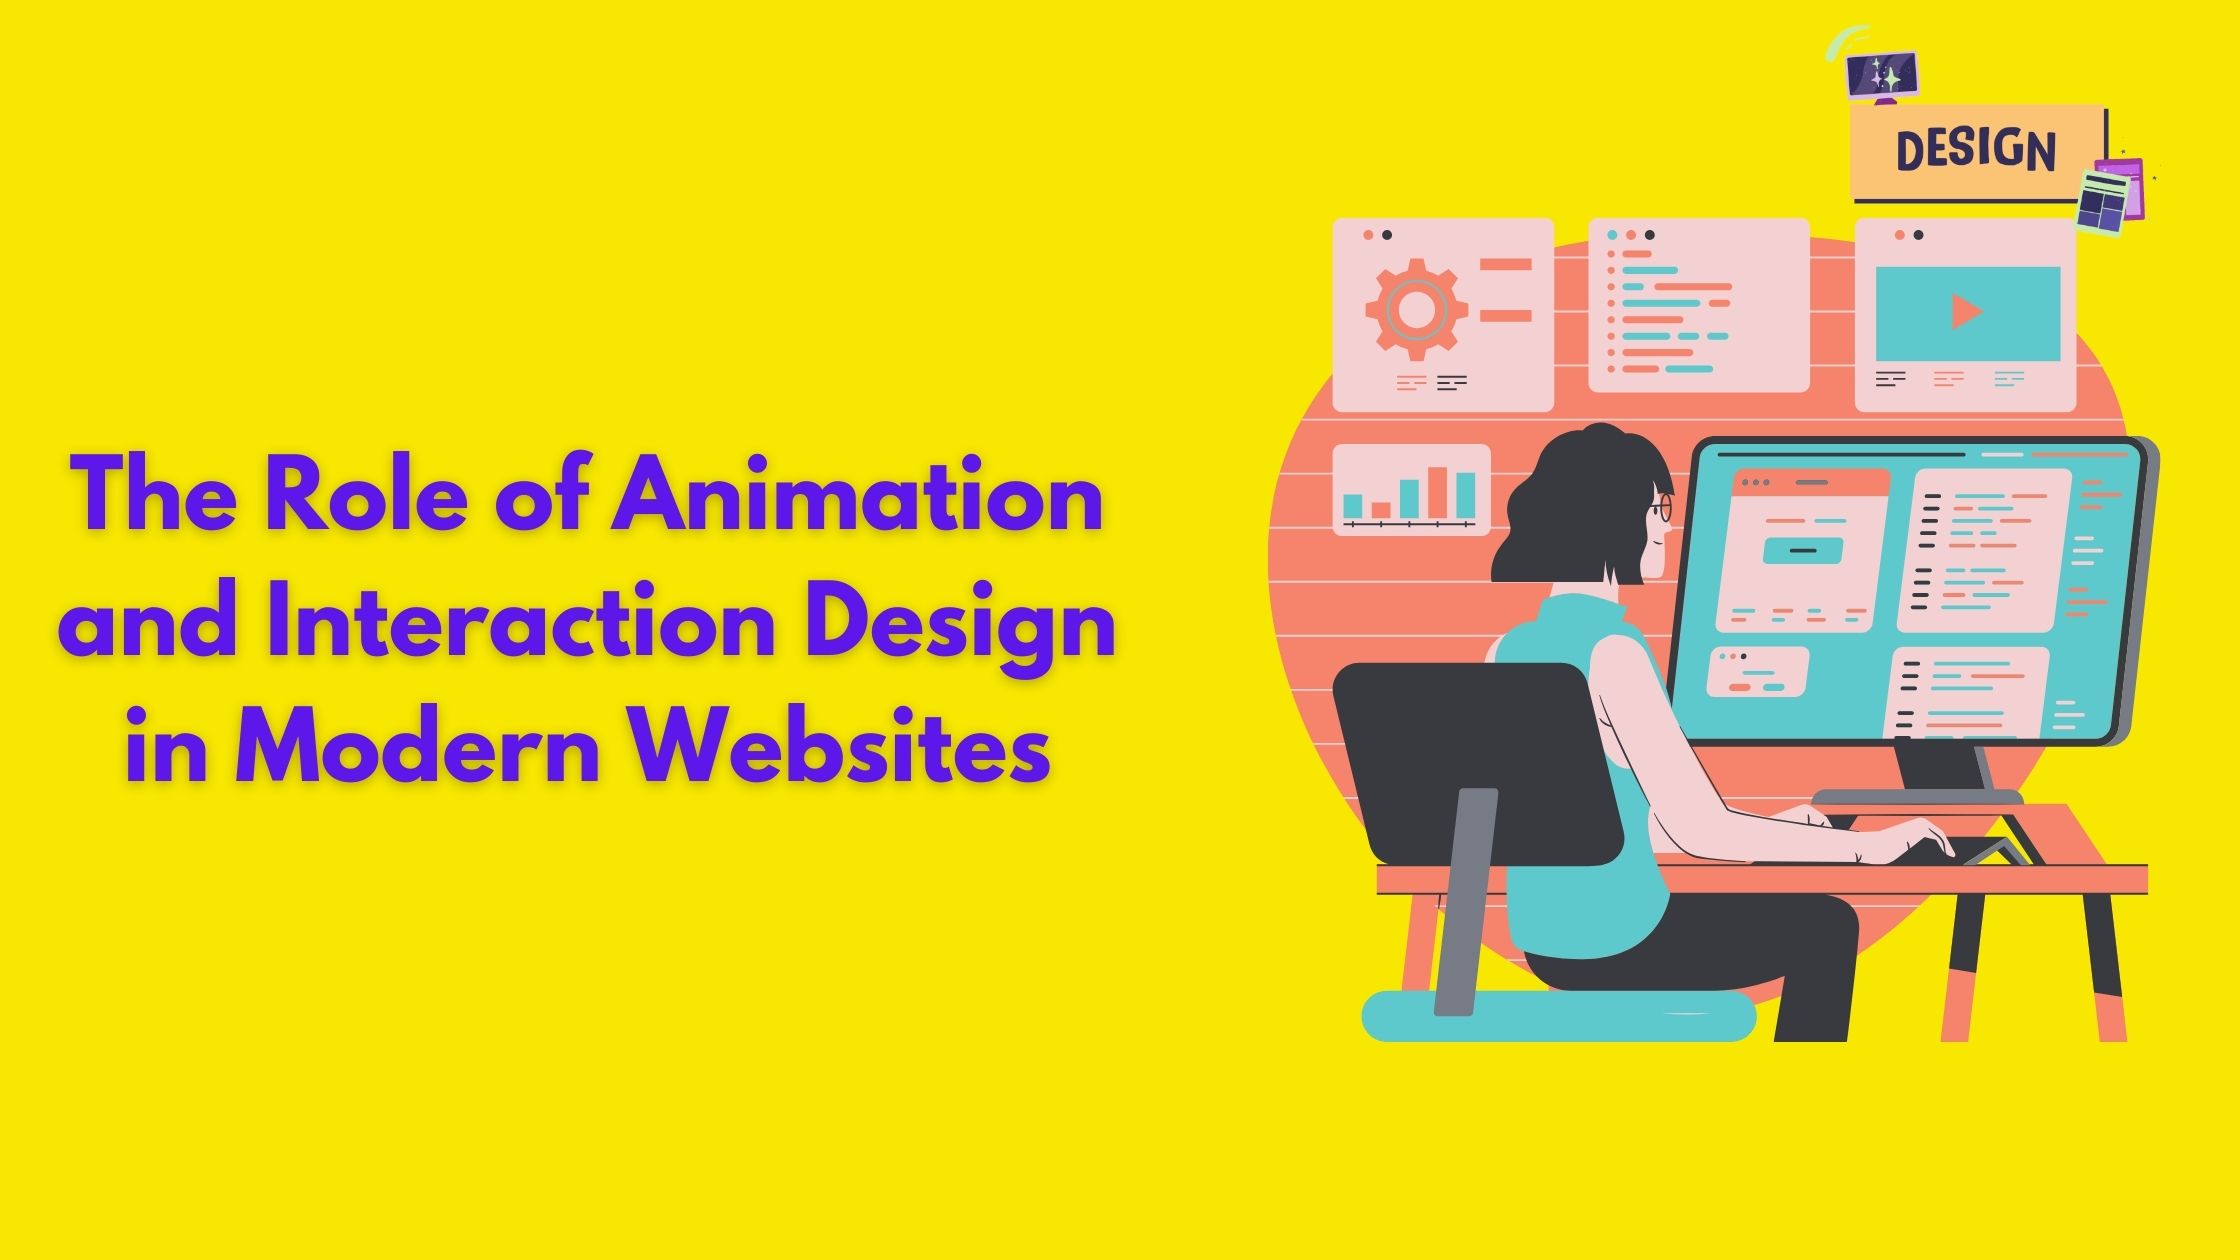 The Role of Animation and Interaction Design in Modern Websites